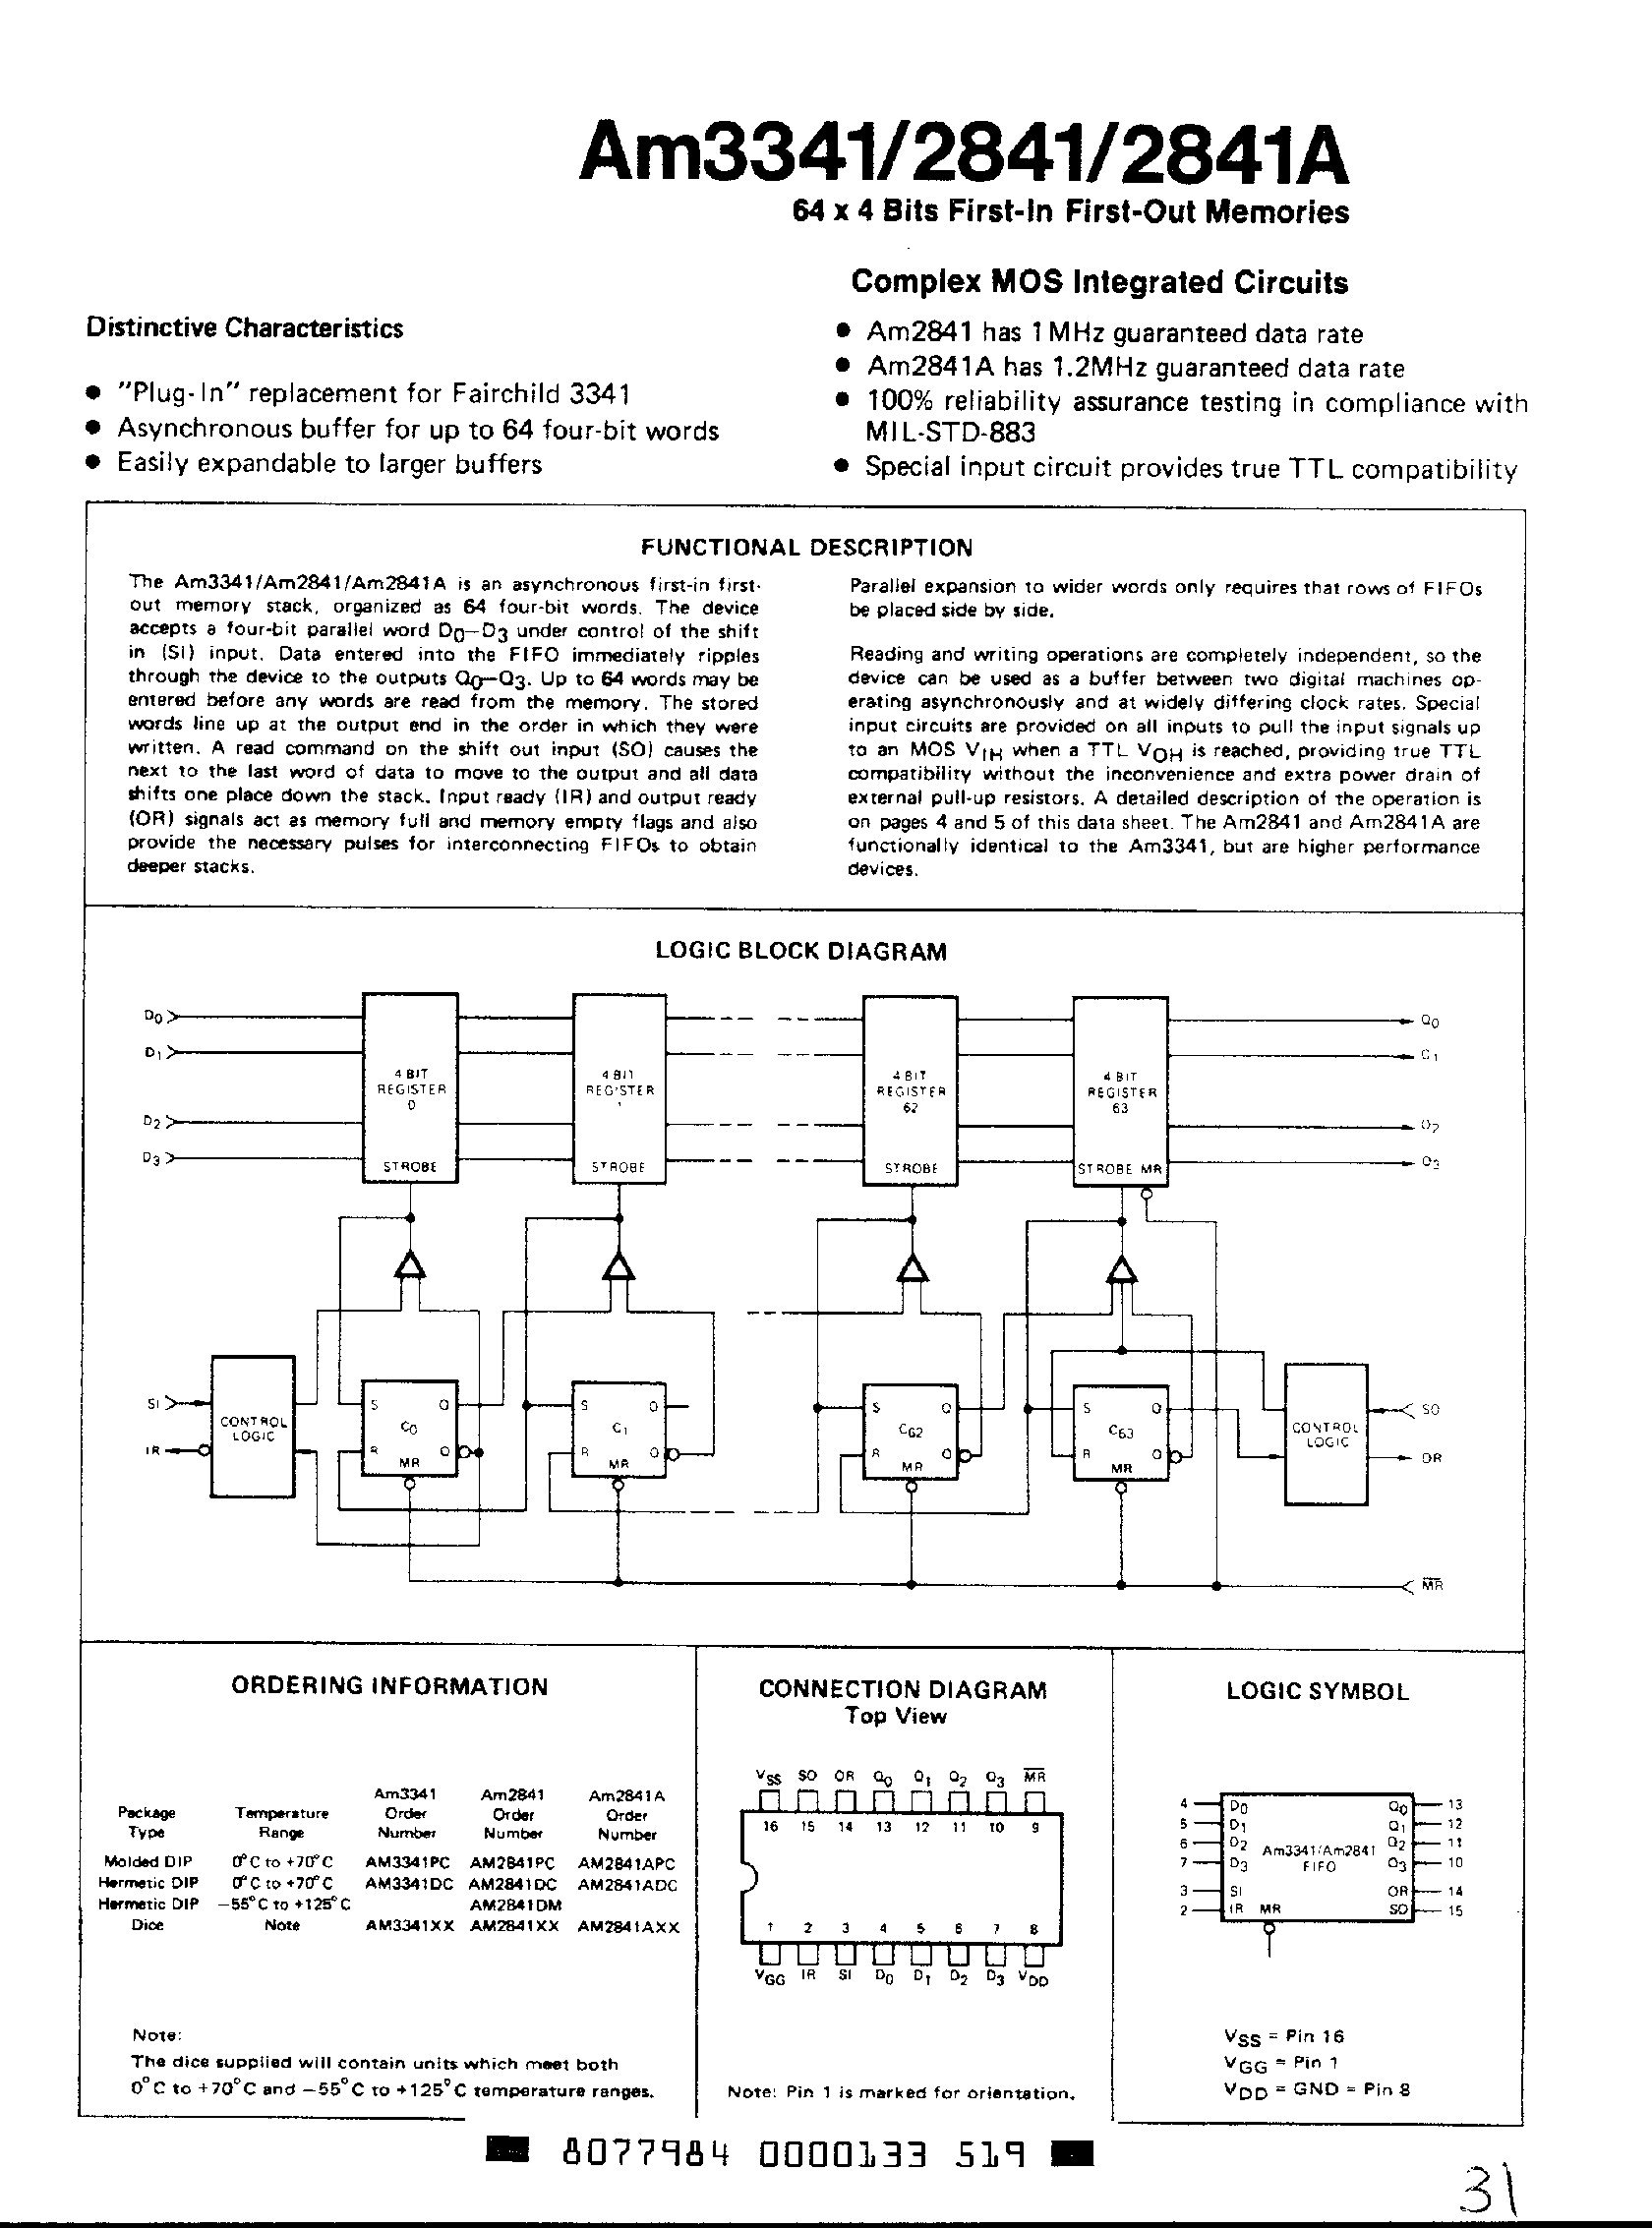 Datasheet AM3341 - 64 x 4 BITS FIRST-IN FIRST-OUT MEMORIES page 1